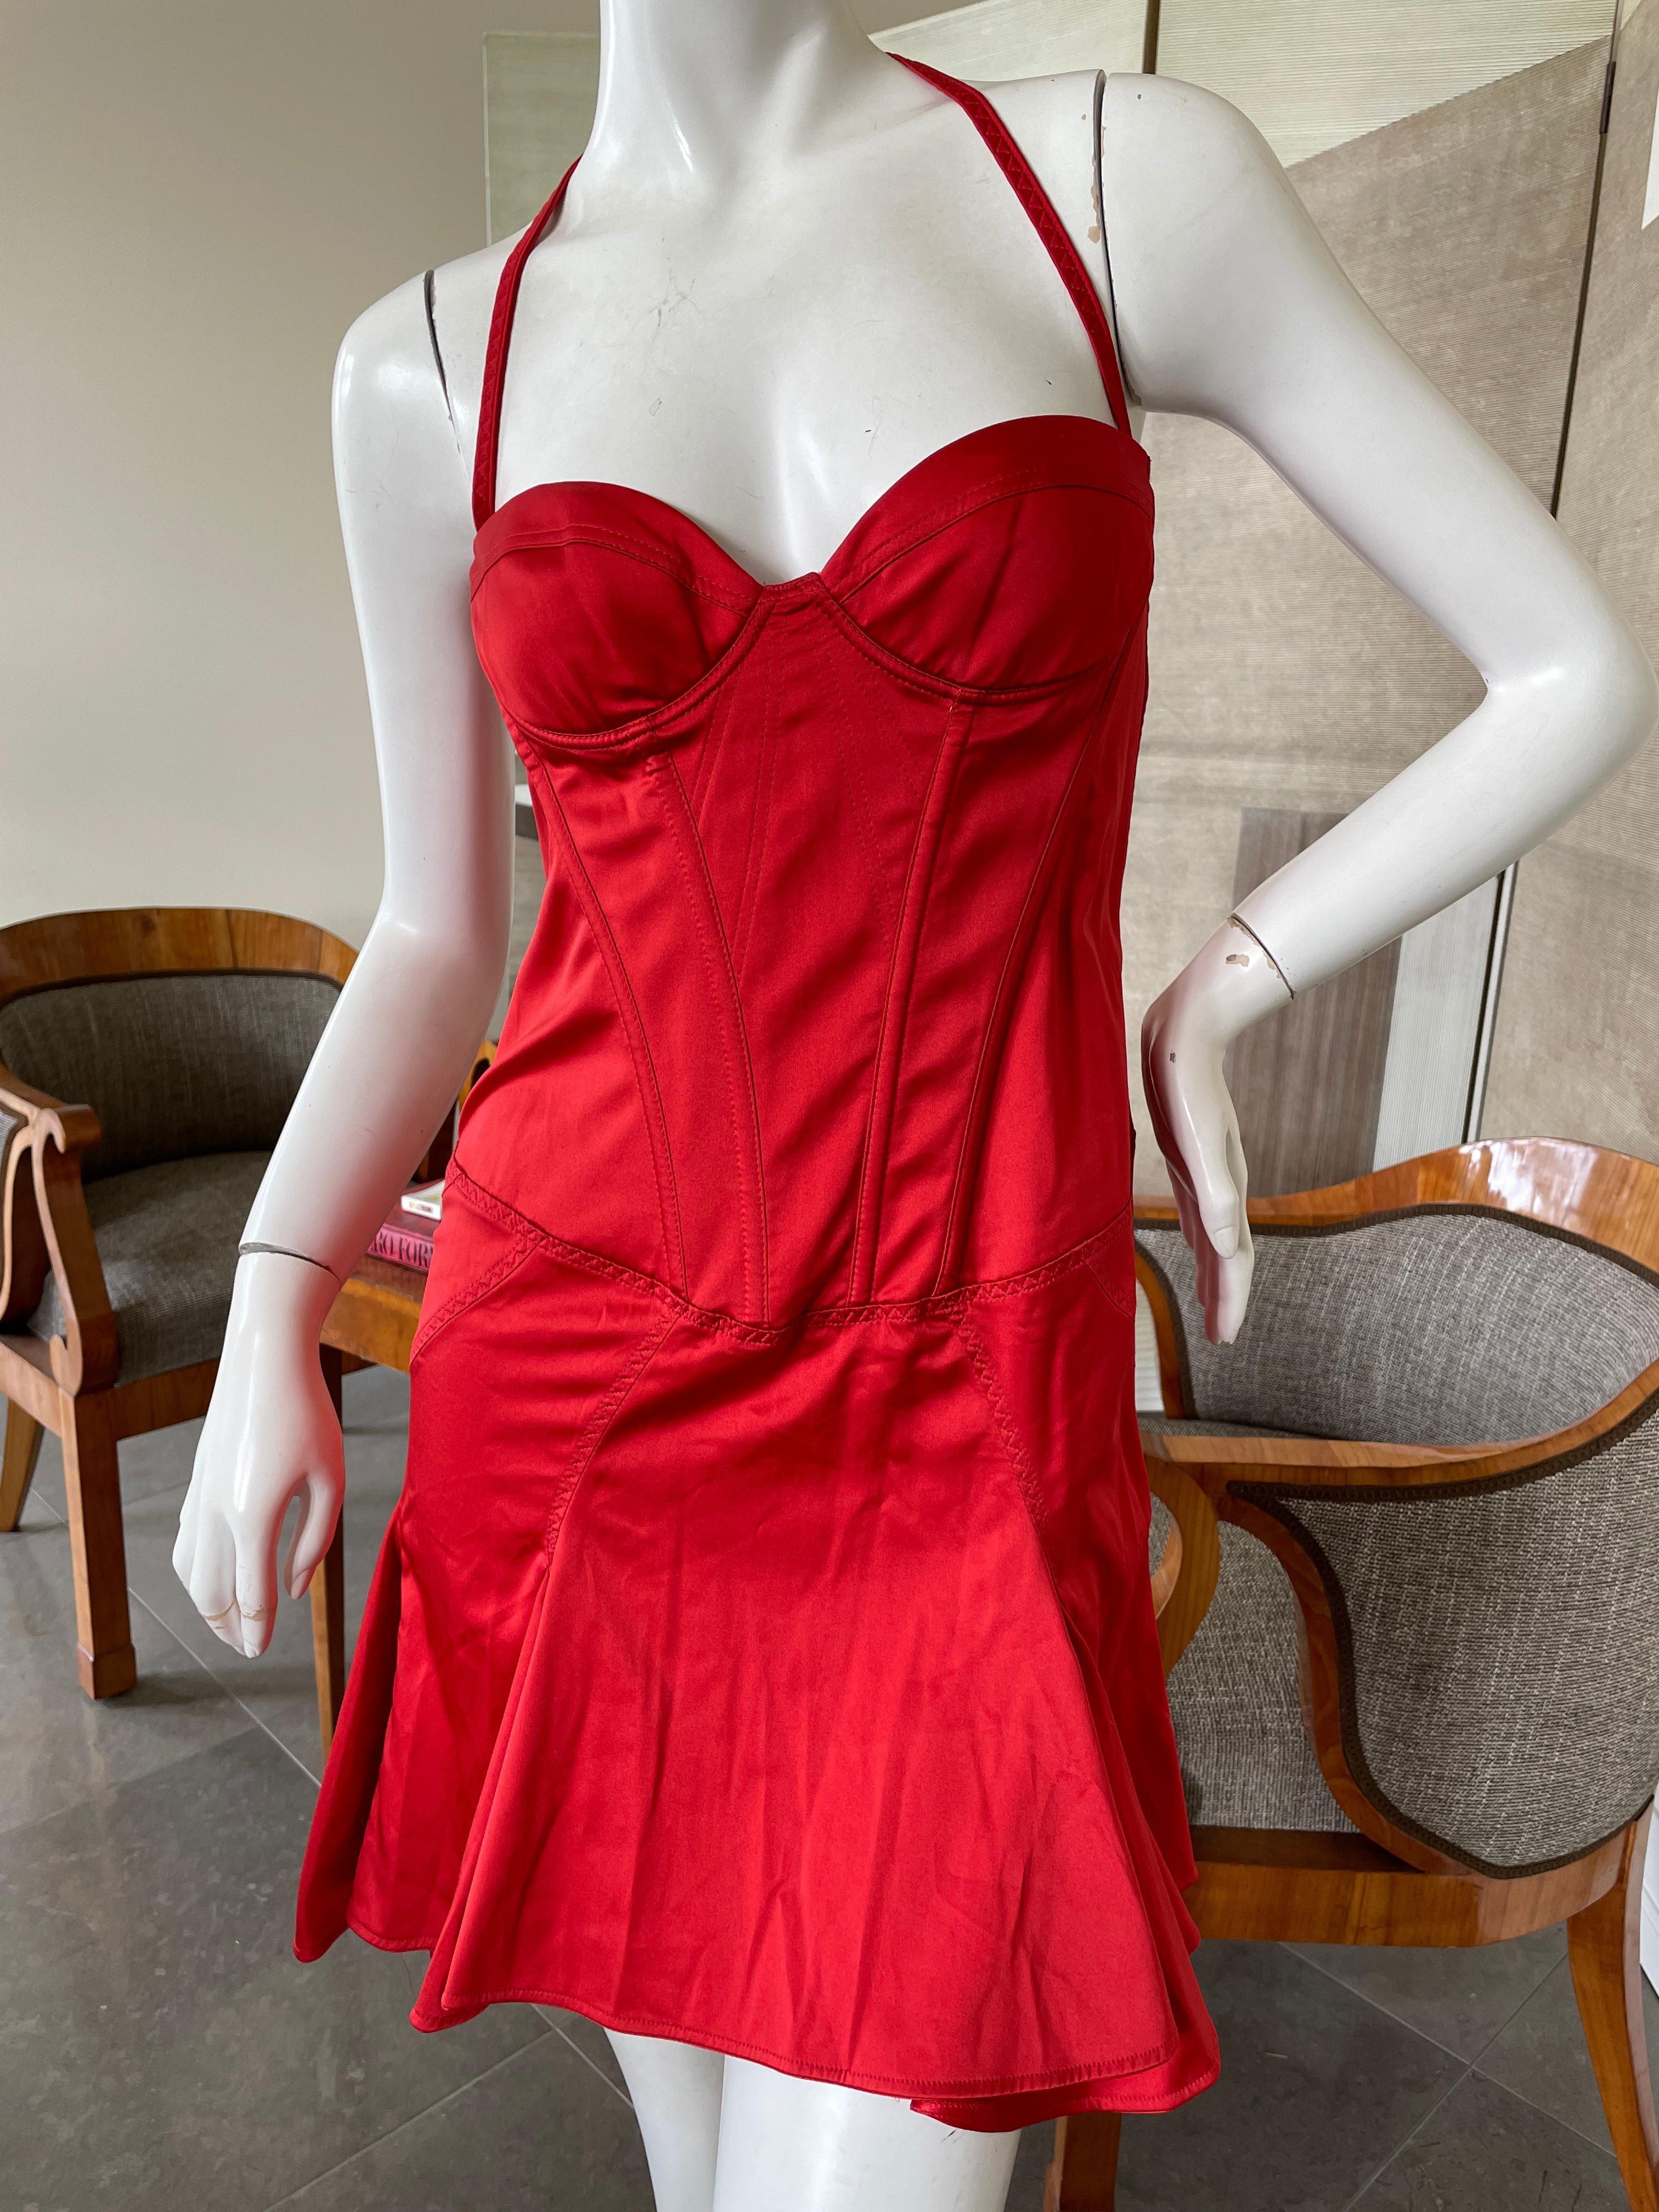 Just Cavalli Red Corset Cocktail Dress by Roberto Cavalli In Excellent Condition In Cloverdale, CA